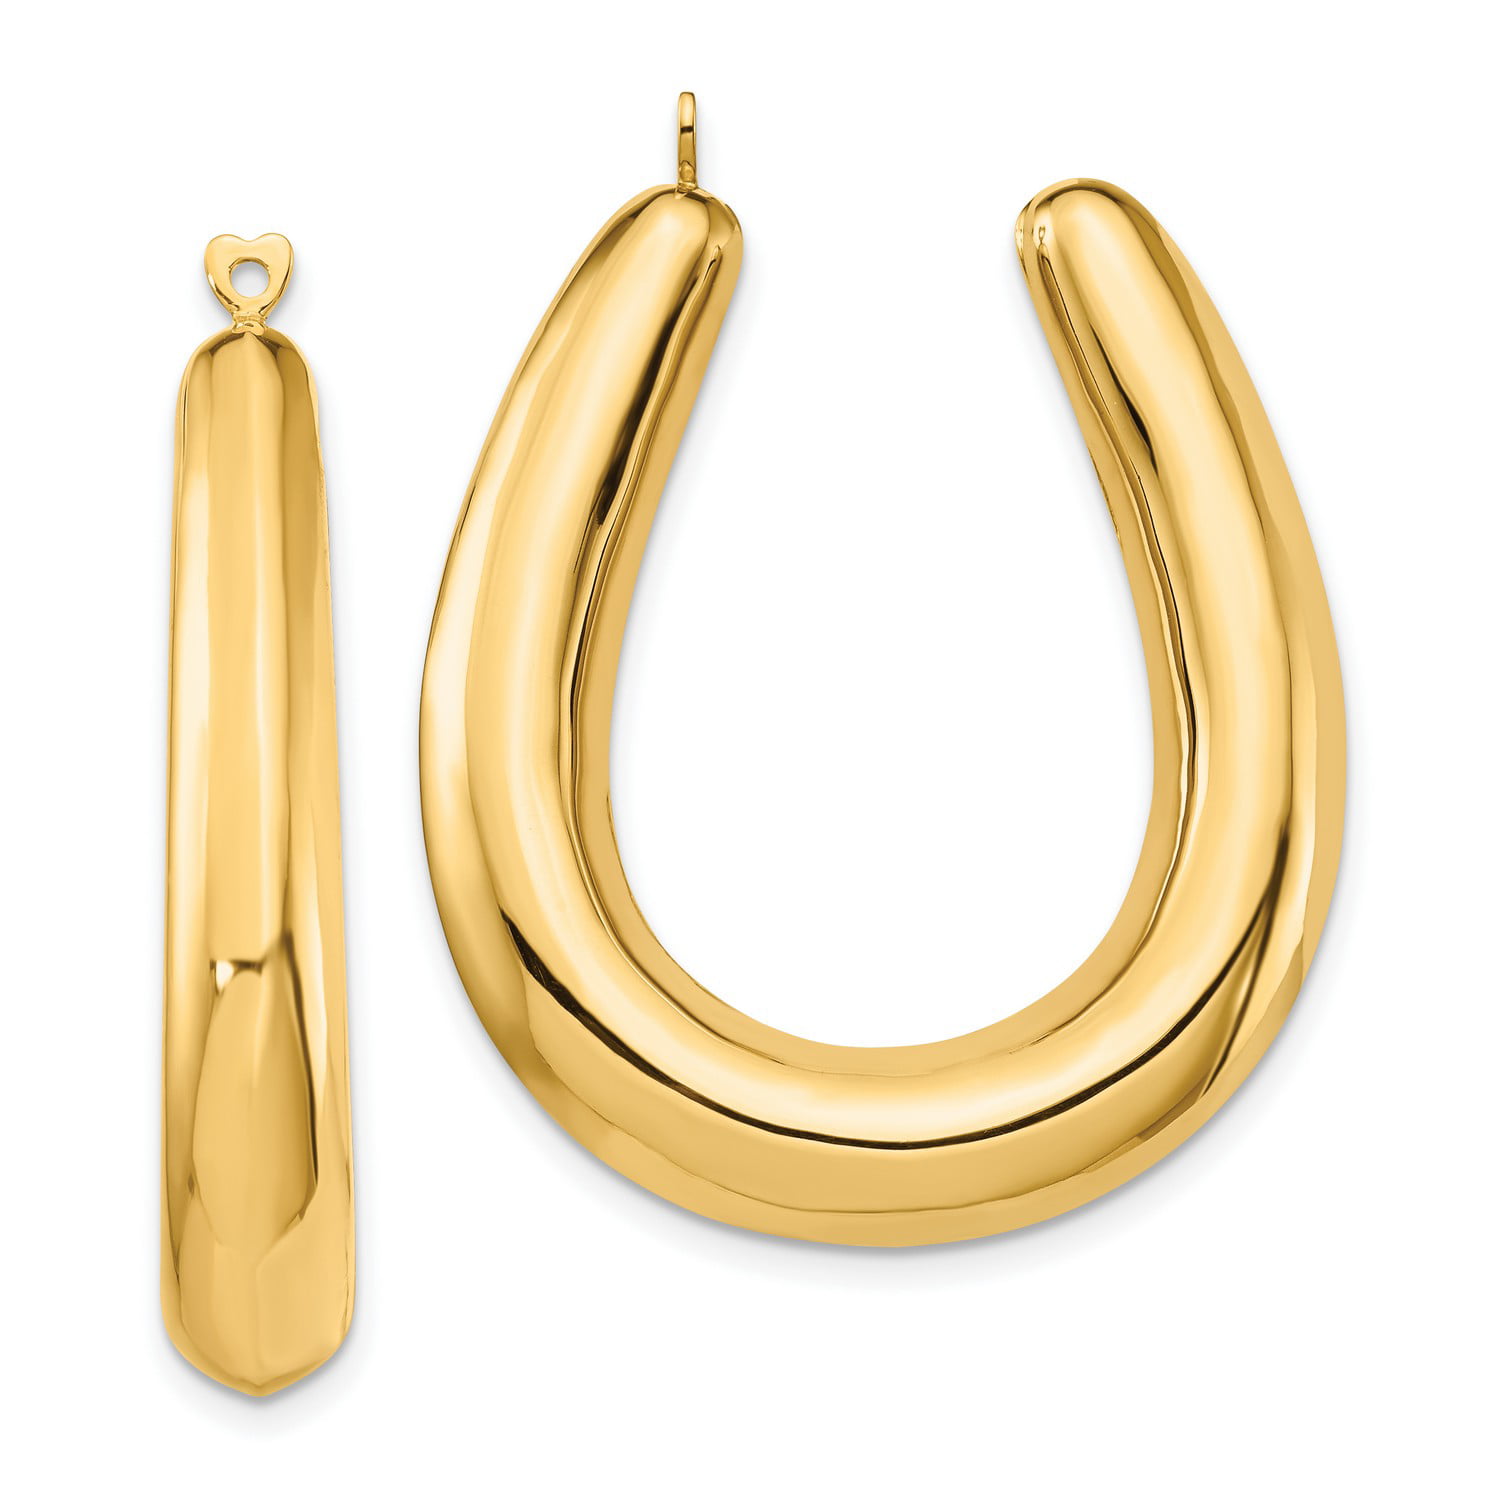 Genuine 14k Yellow Gold Polished Hollow Hoop Earring Jackets 37x7mm